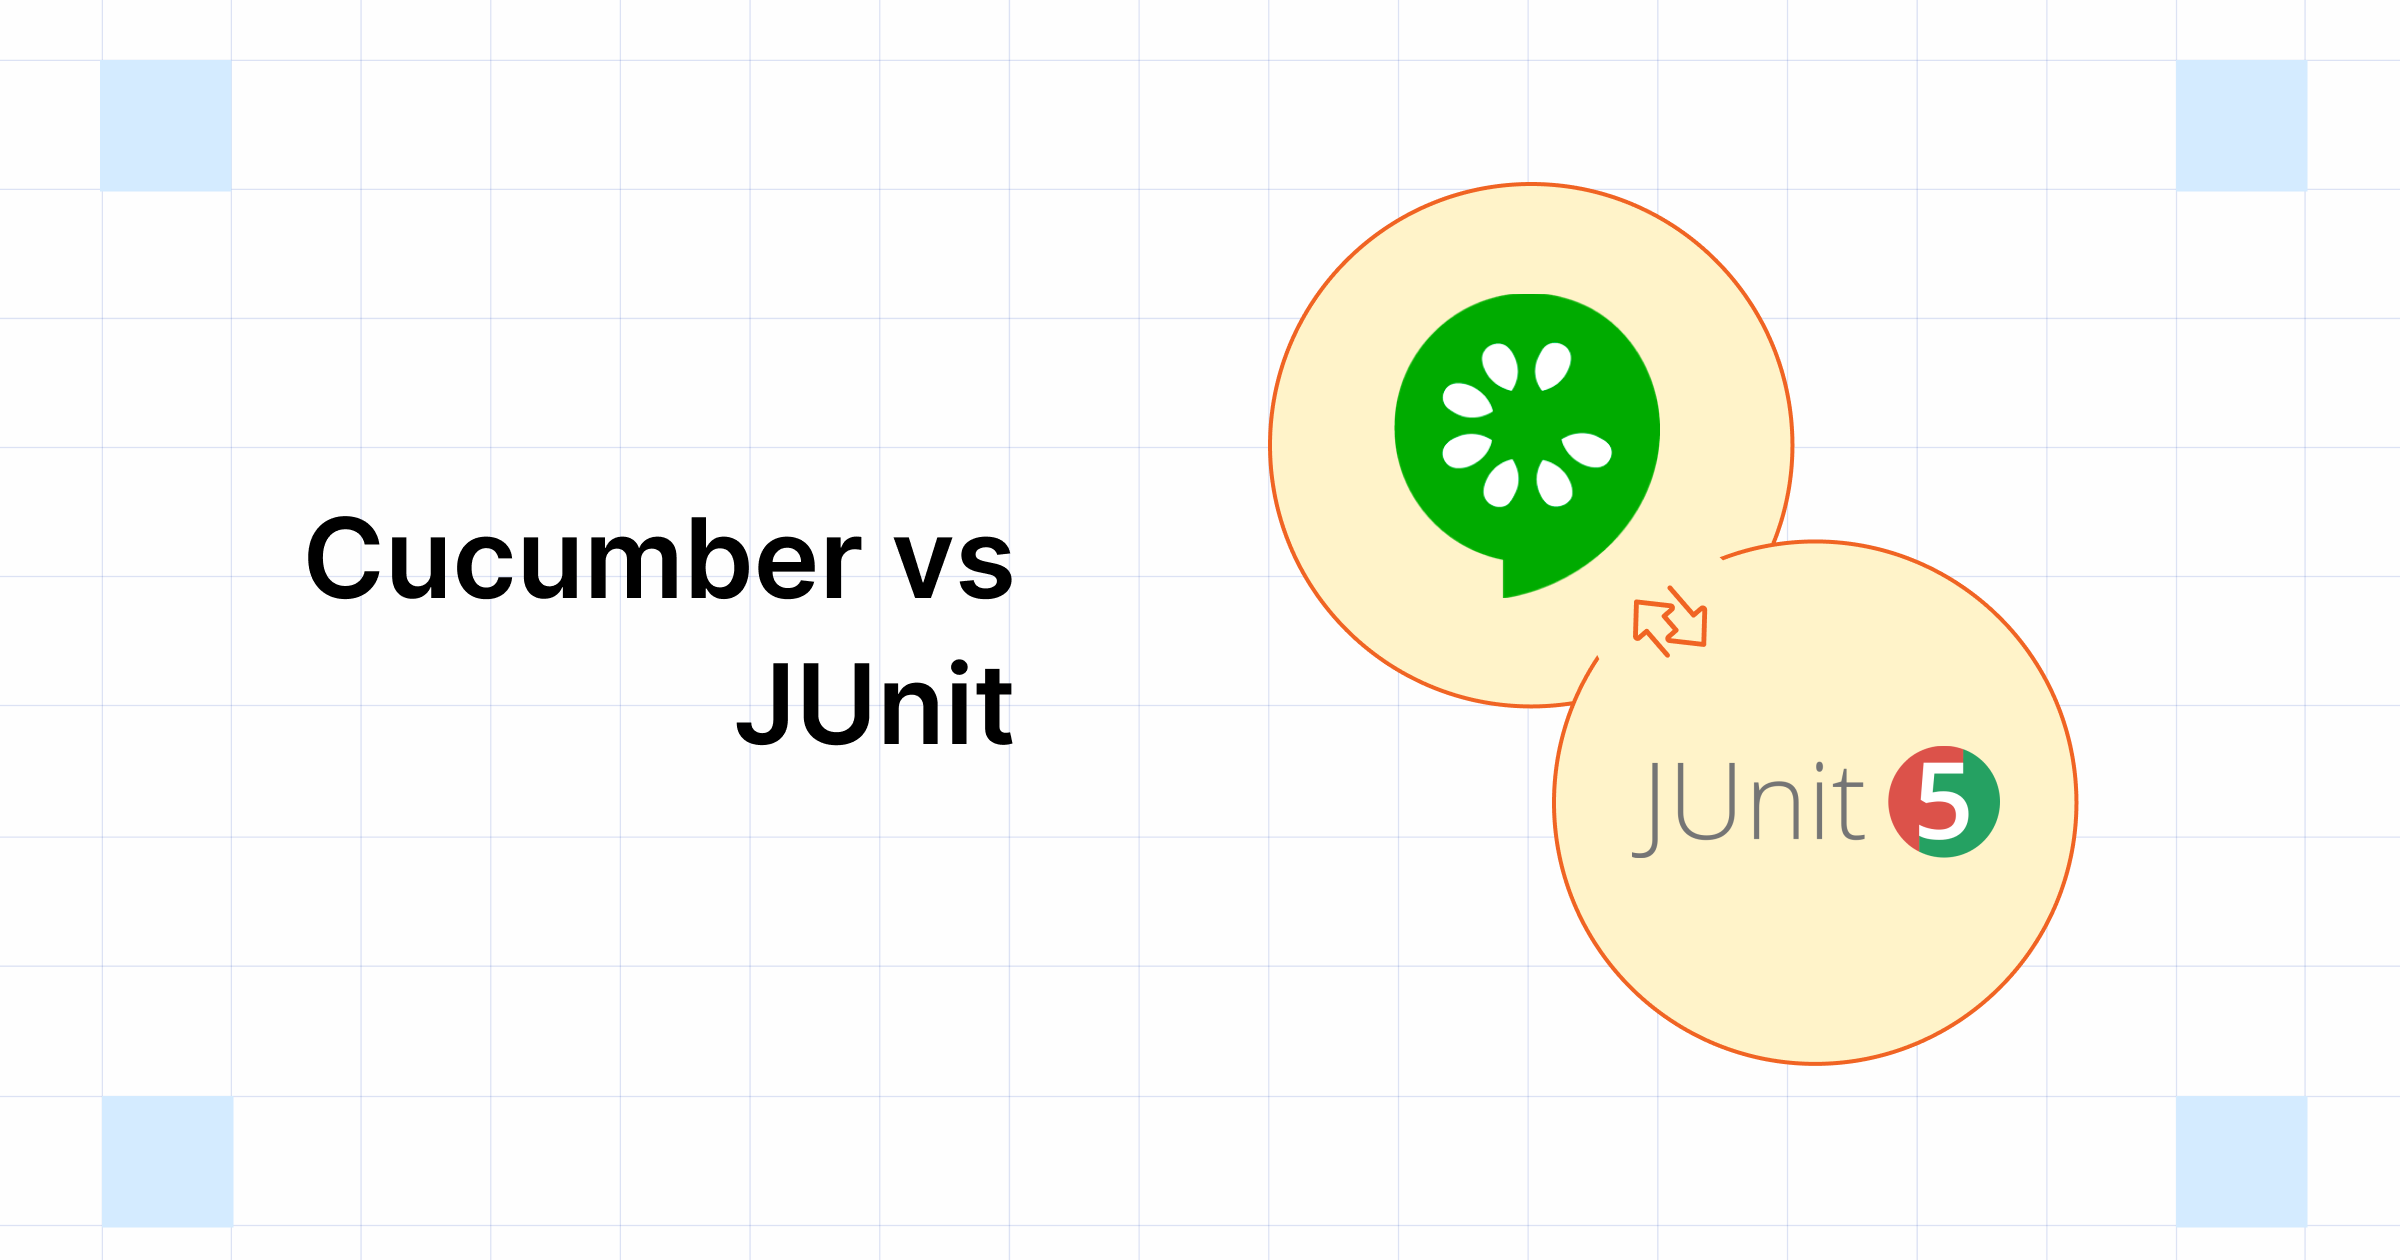 Cucumber vs JUnit: What are the differences